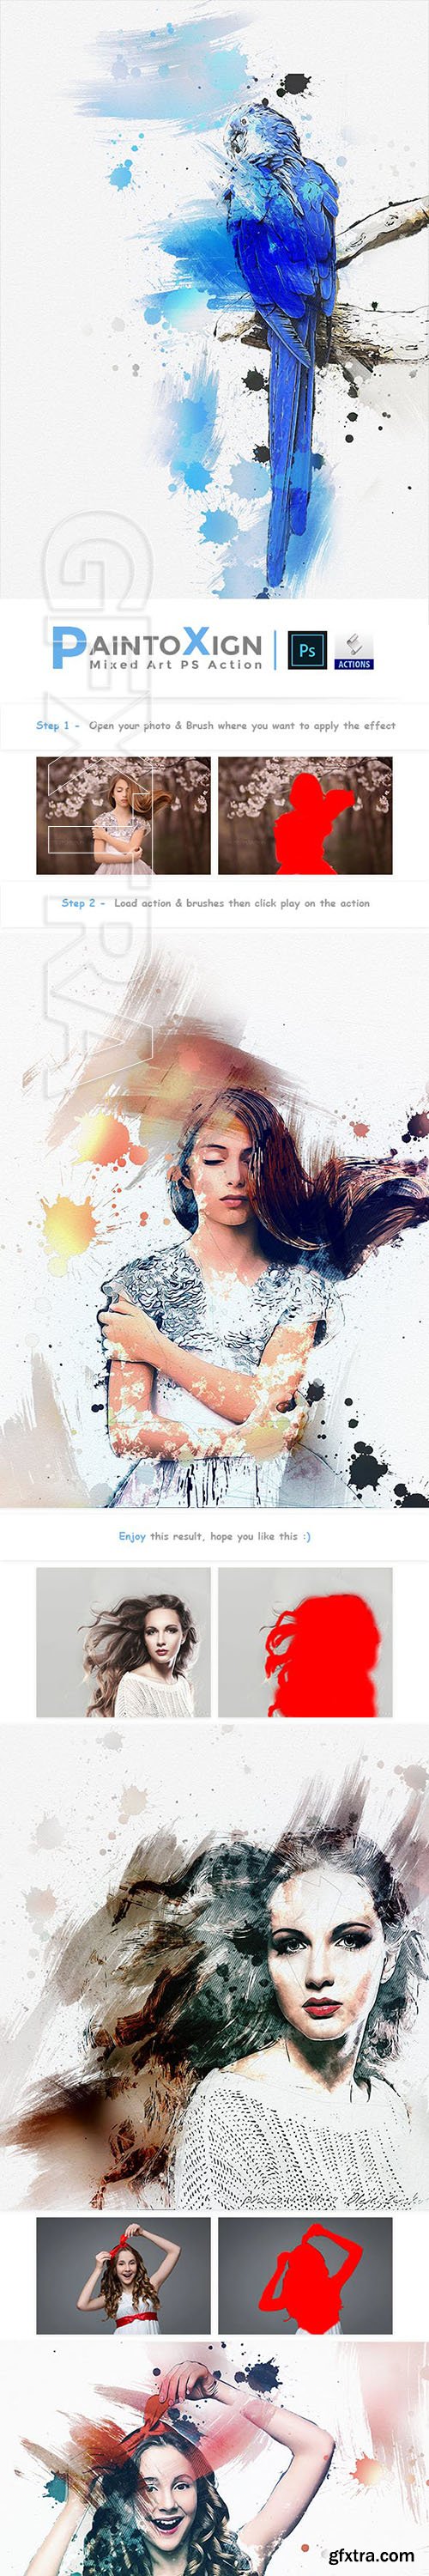 GraphicRiver - PaintoXign Mixed Art PS Action 23106638